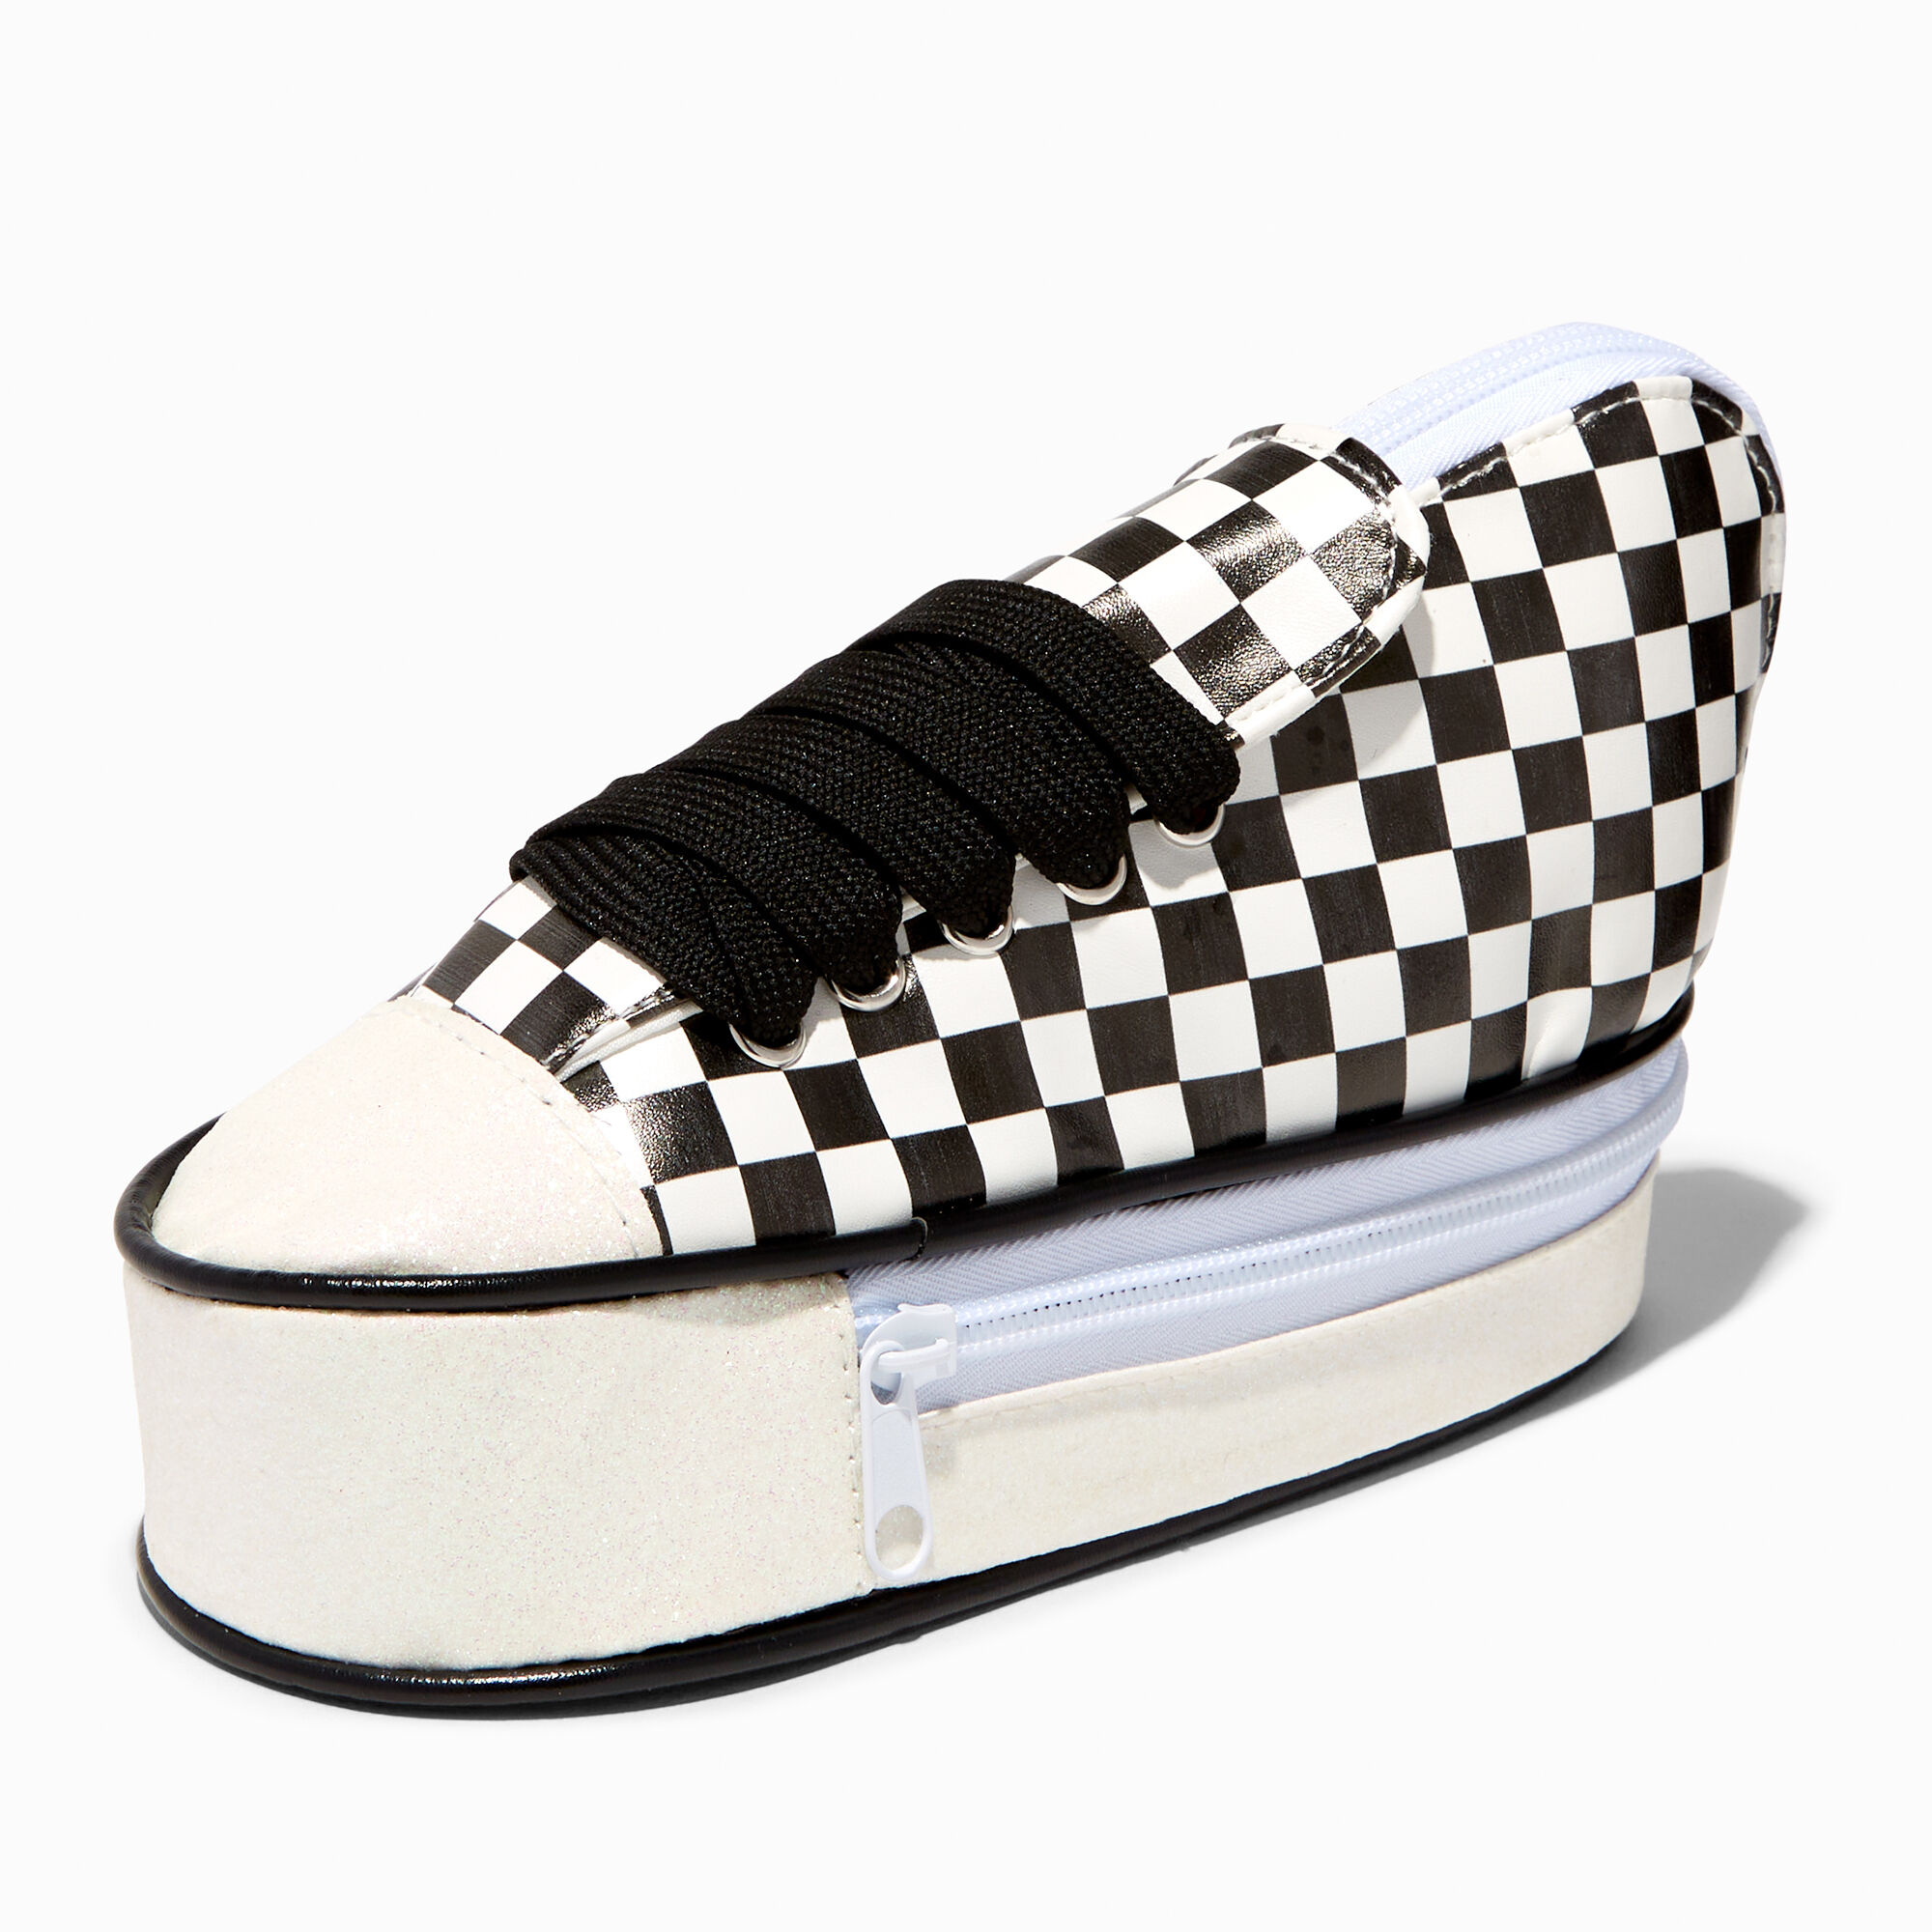 View Claires Checkered Sneaker Pencil Case information